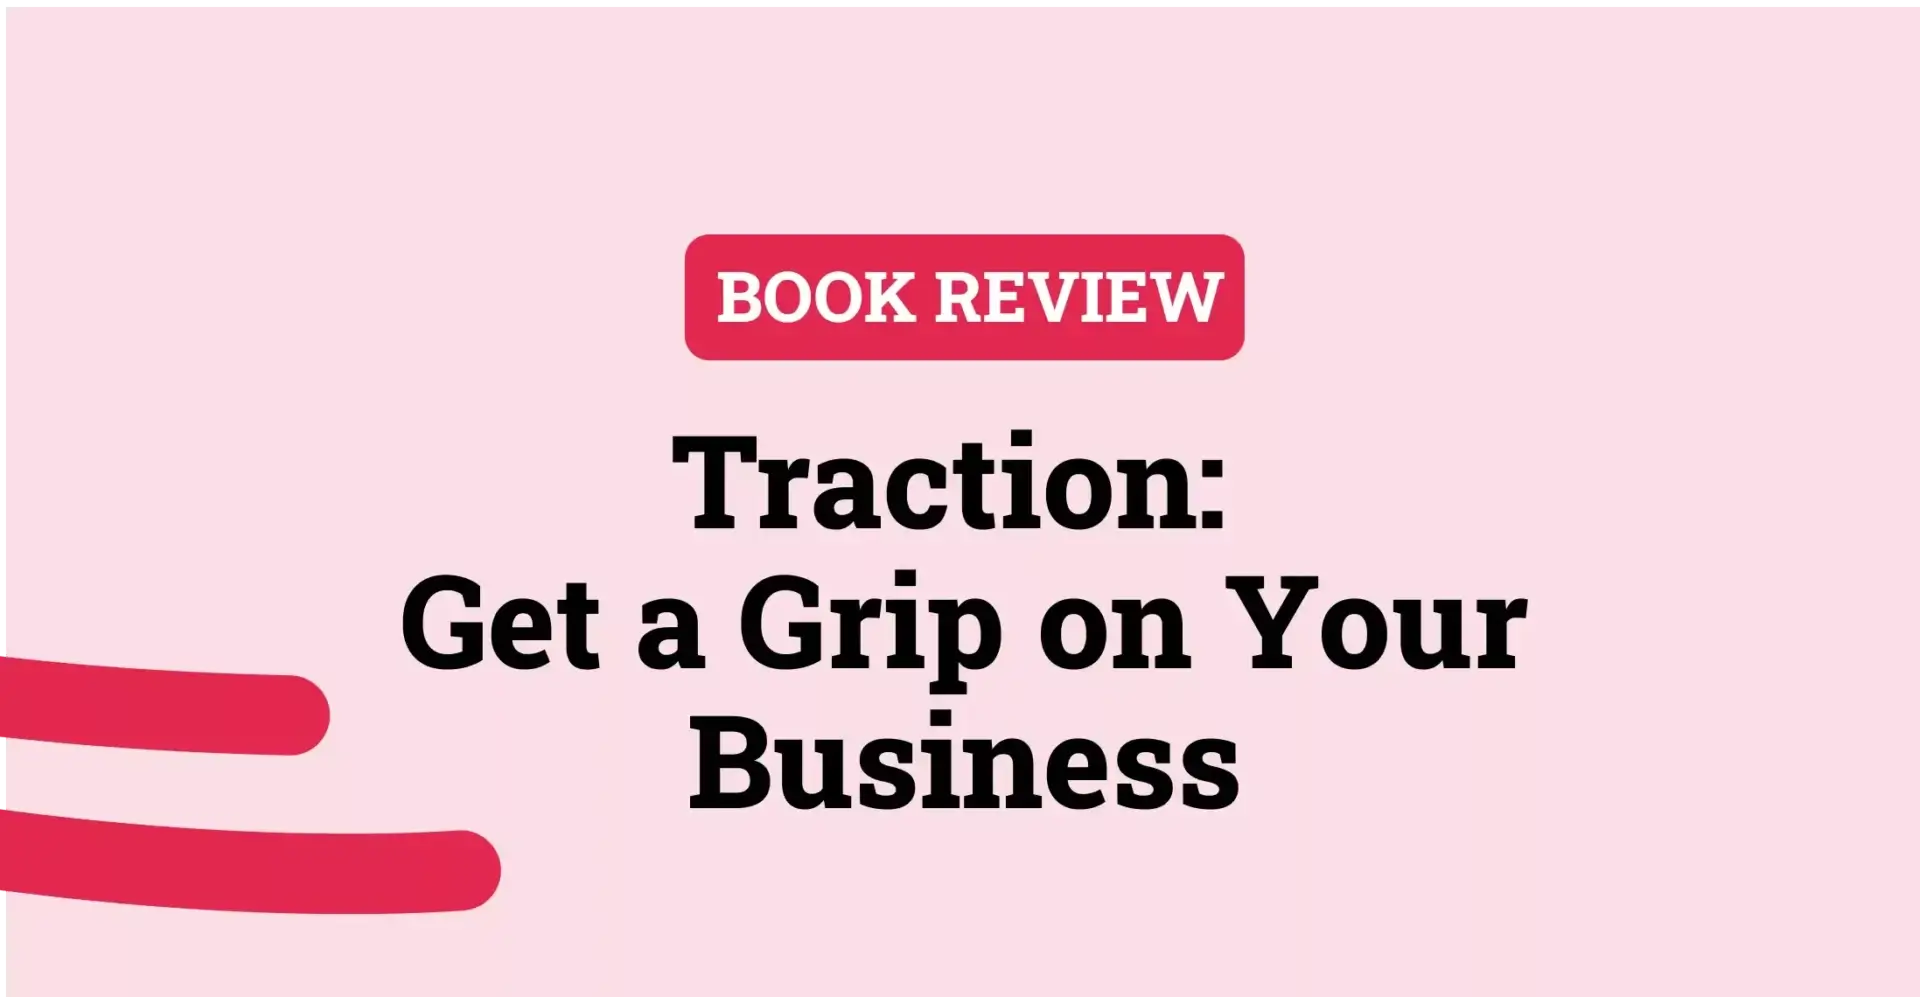 Image for Whale blog on Traction book review